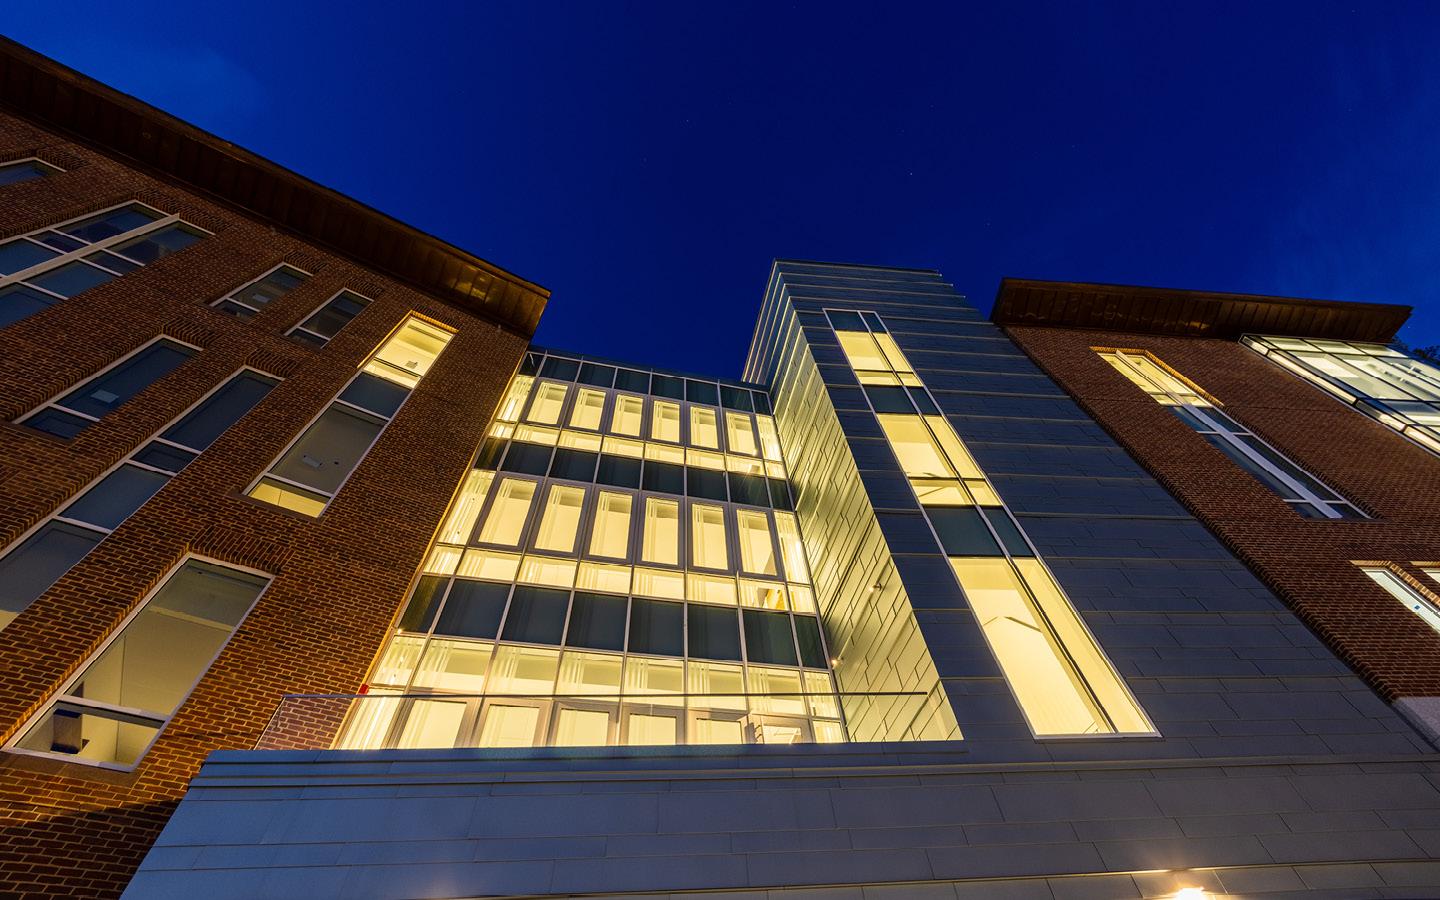 an exterior image of the Class of 82 Engineering Computer Science Center at night